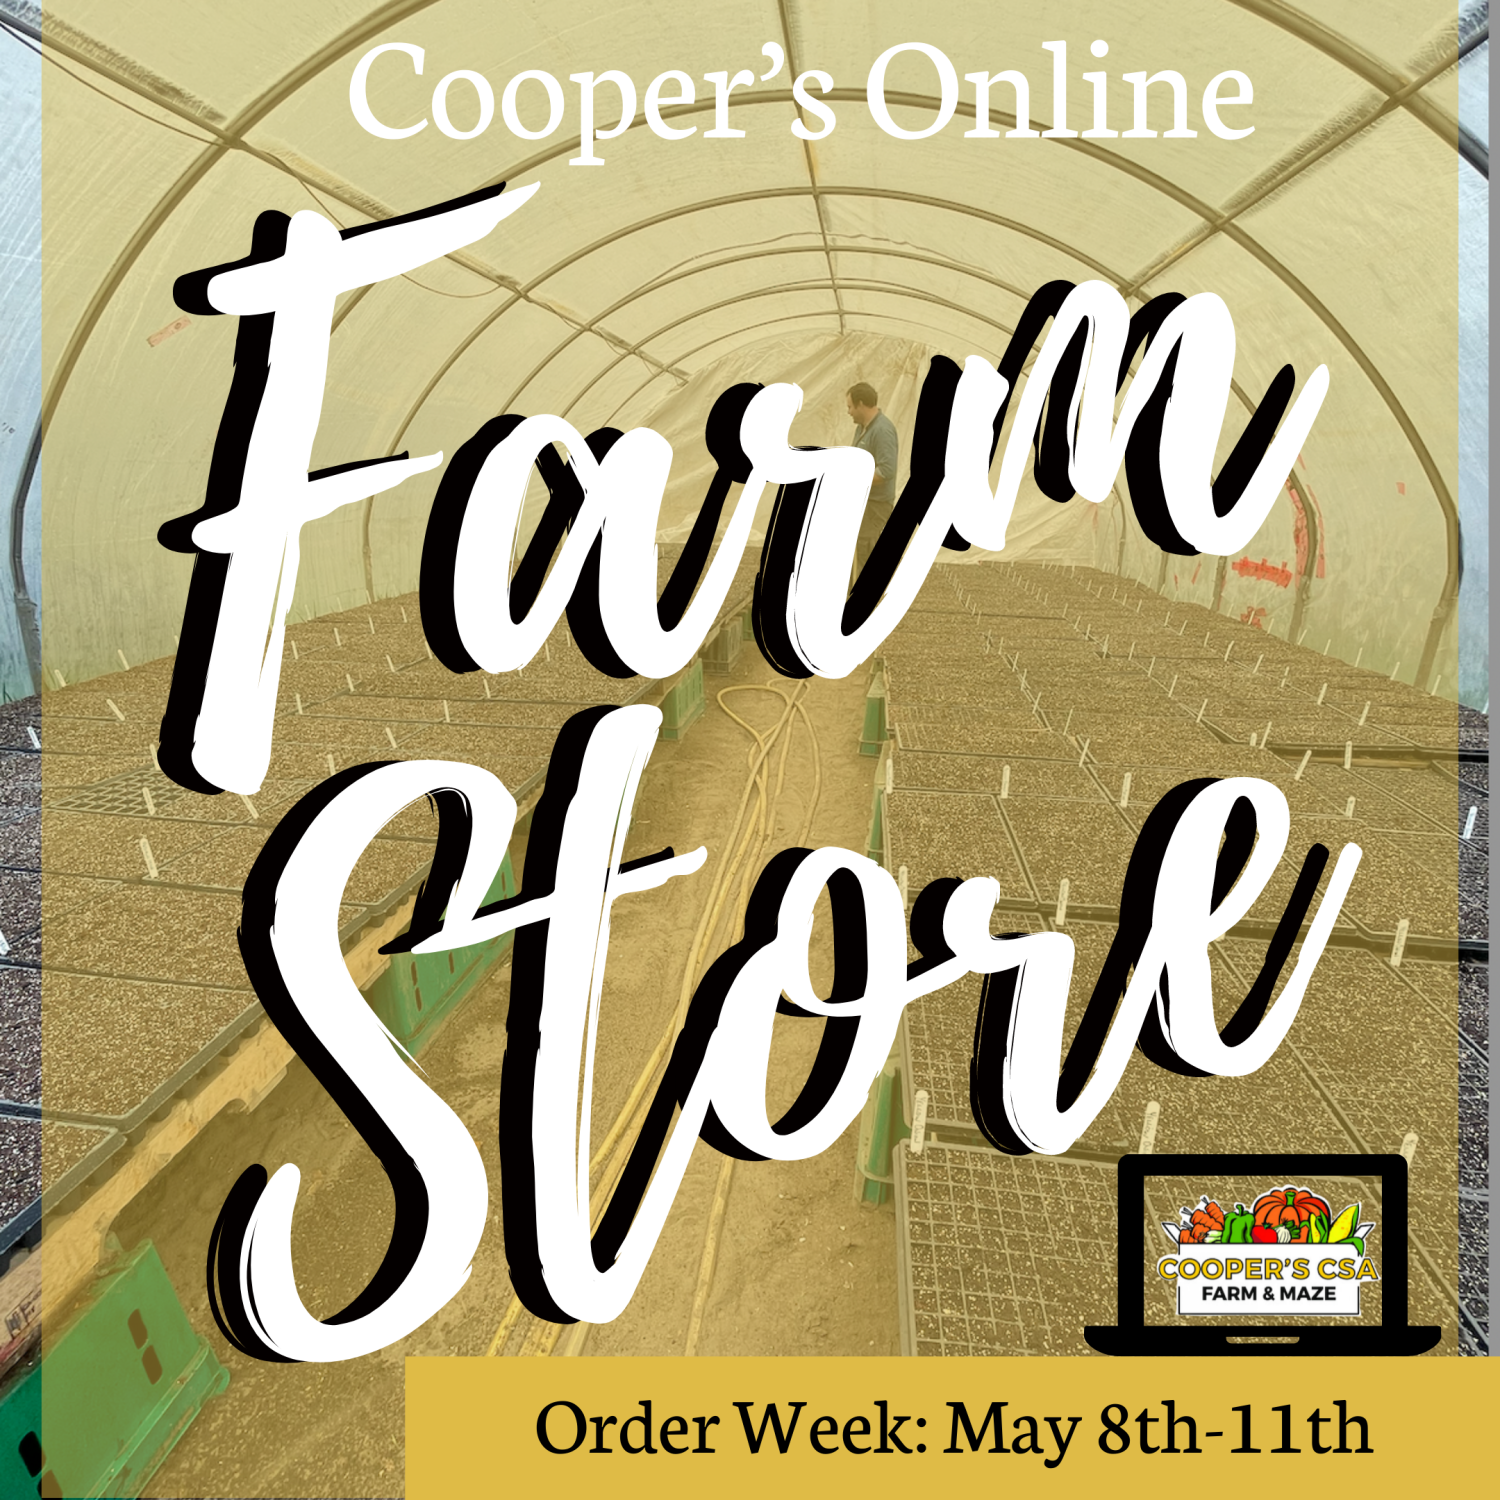 Previous Happening: Coopers CSA Online FarmStore- Order week May 8th-11th